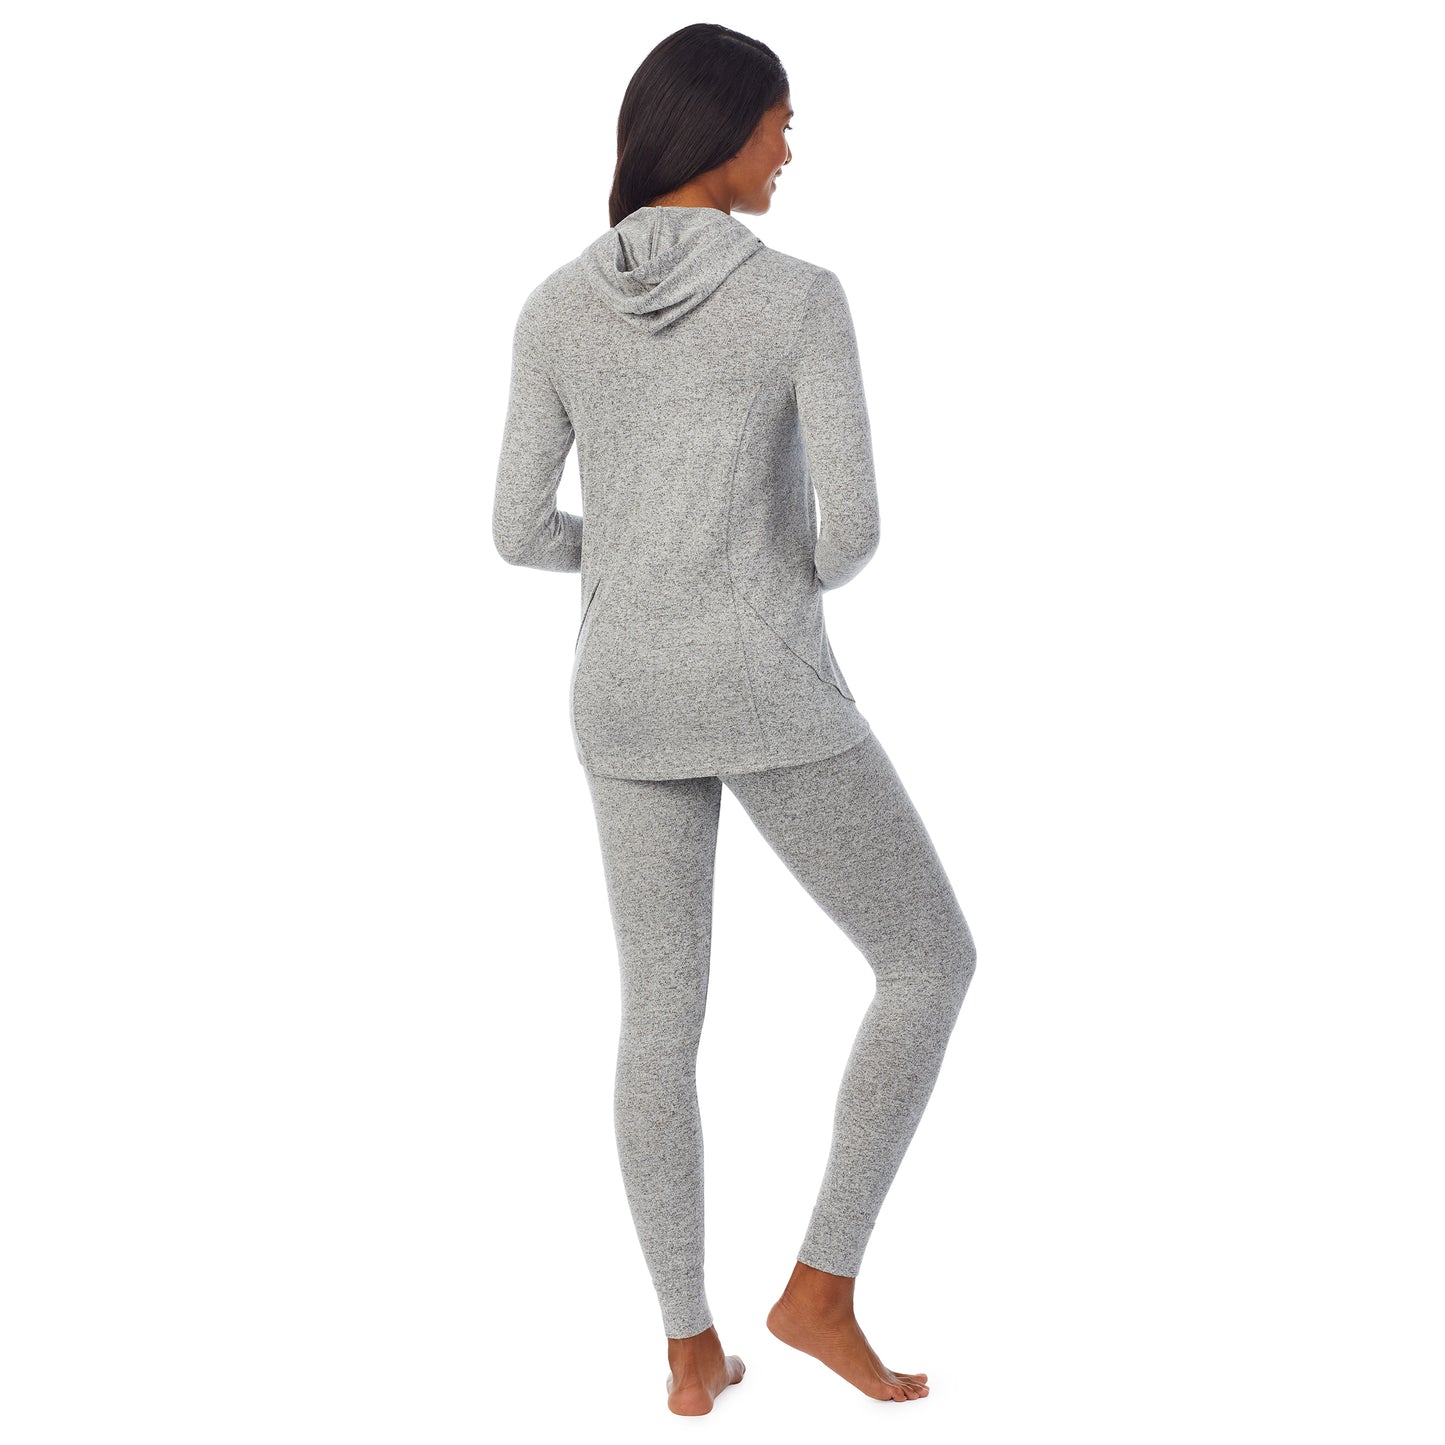 Marled Grey; Model is wearing size S. She is 5’10”, Bust 34”, Waist 24”, Hips 34”. @A lady wearing a marled grey long sleeve tunic hoodie.